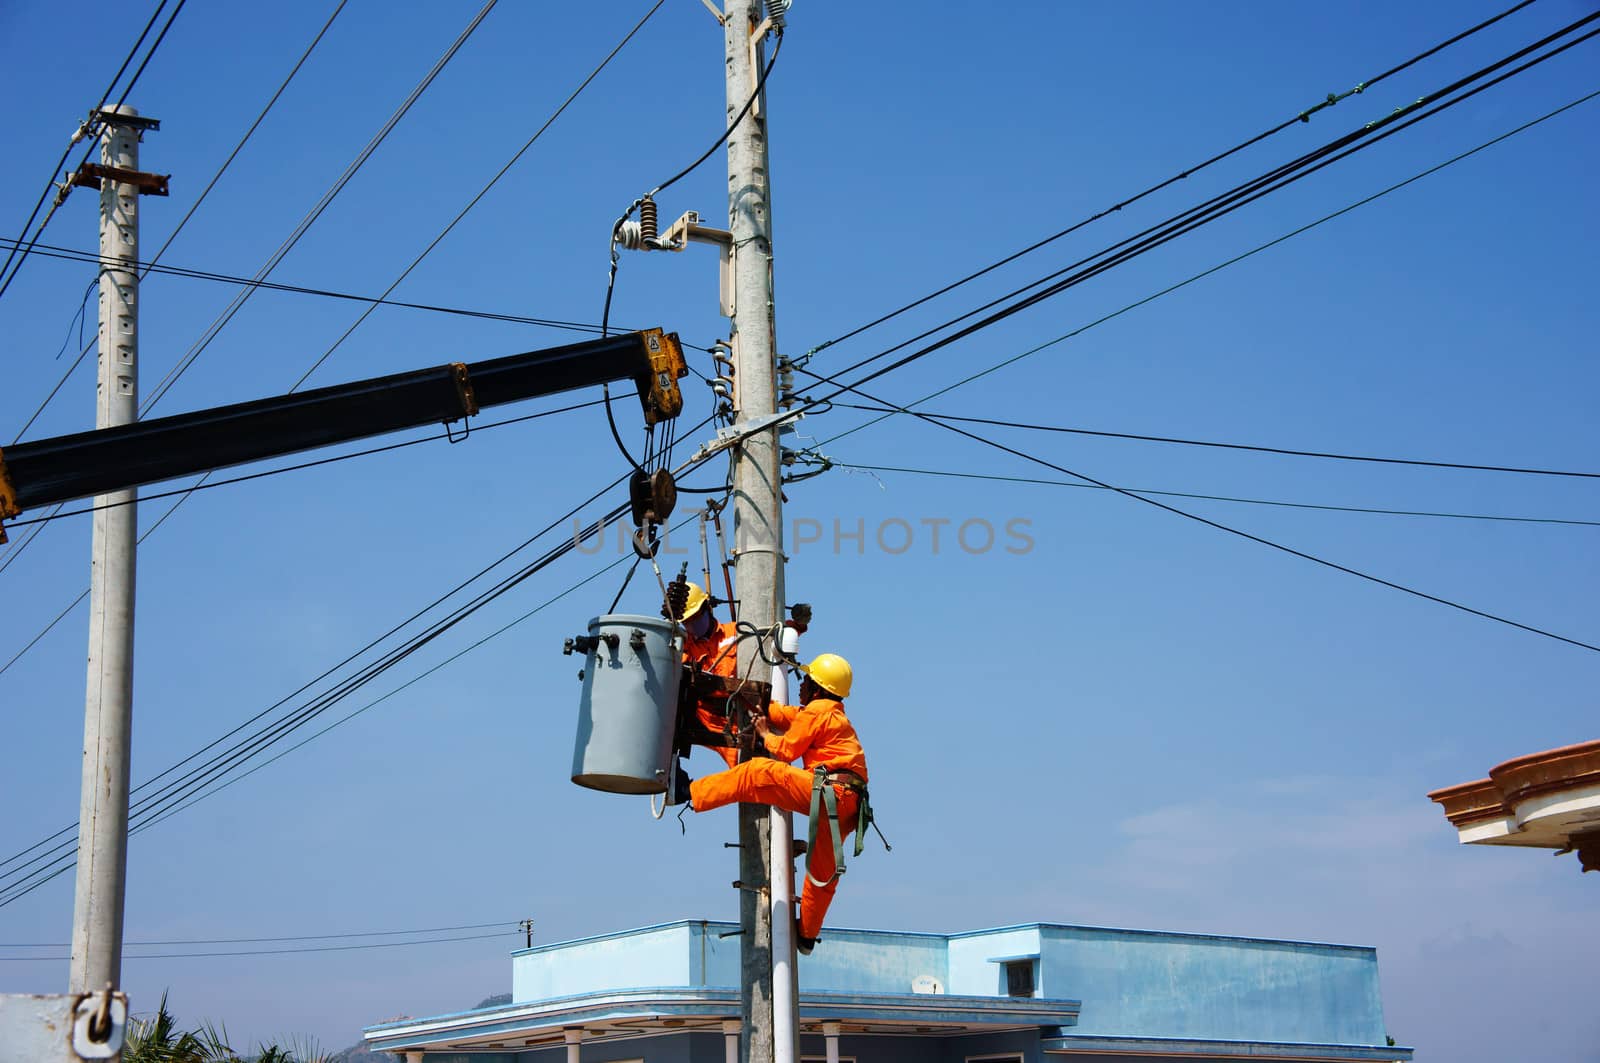  electrician repair system of electric wire by xuanhuongho